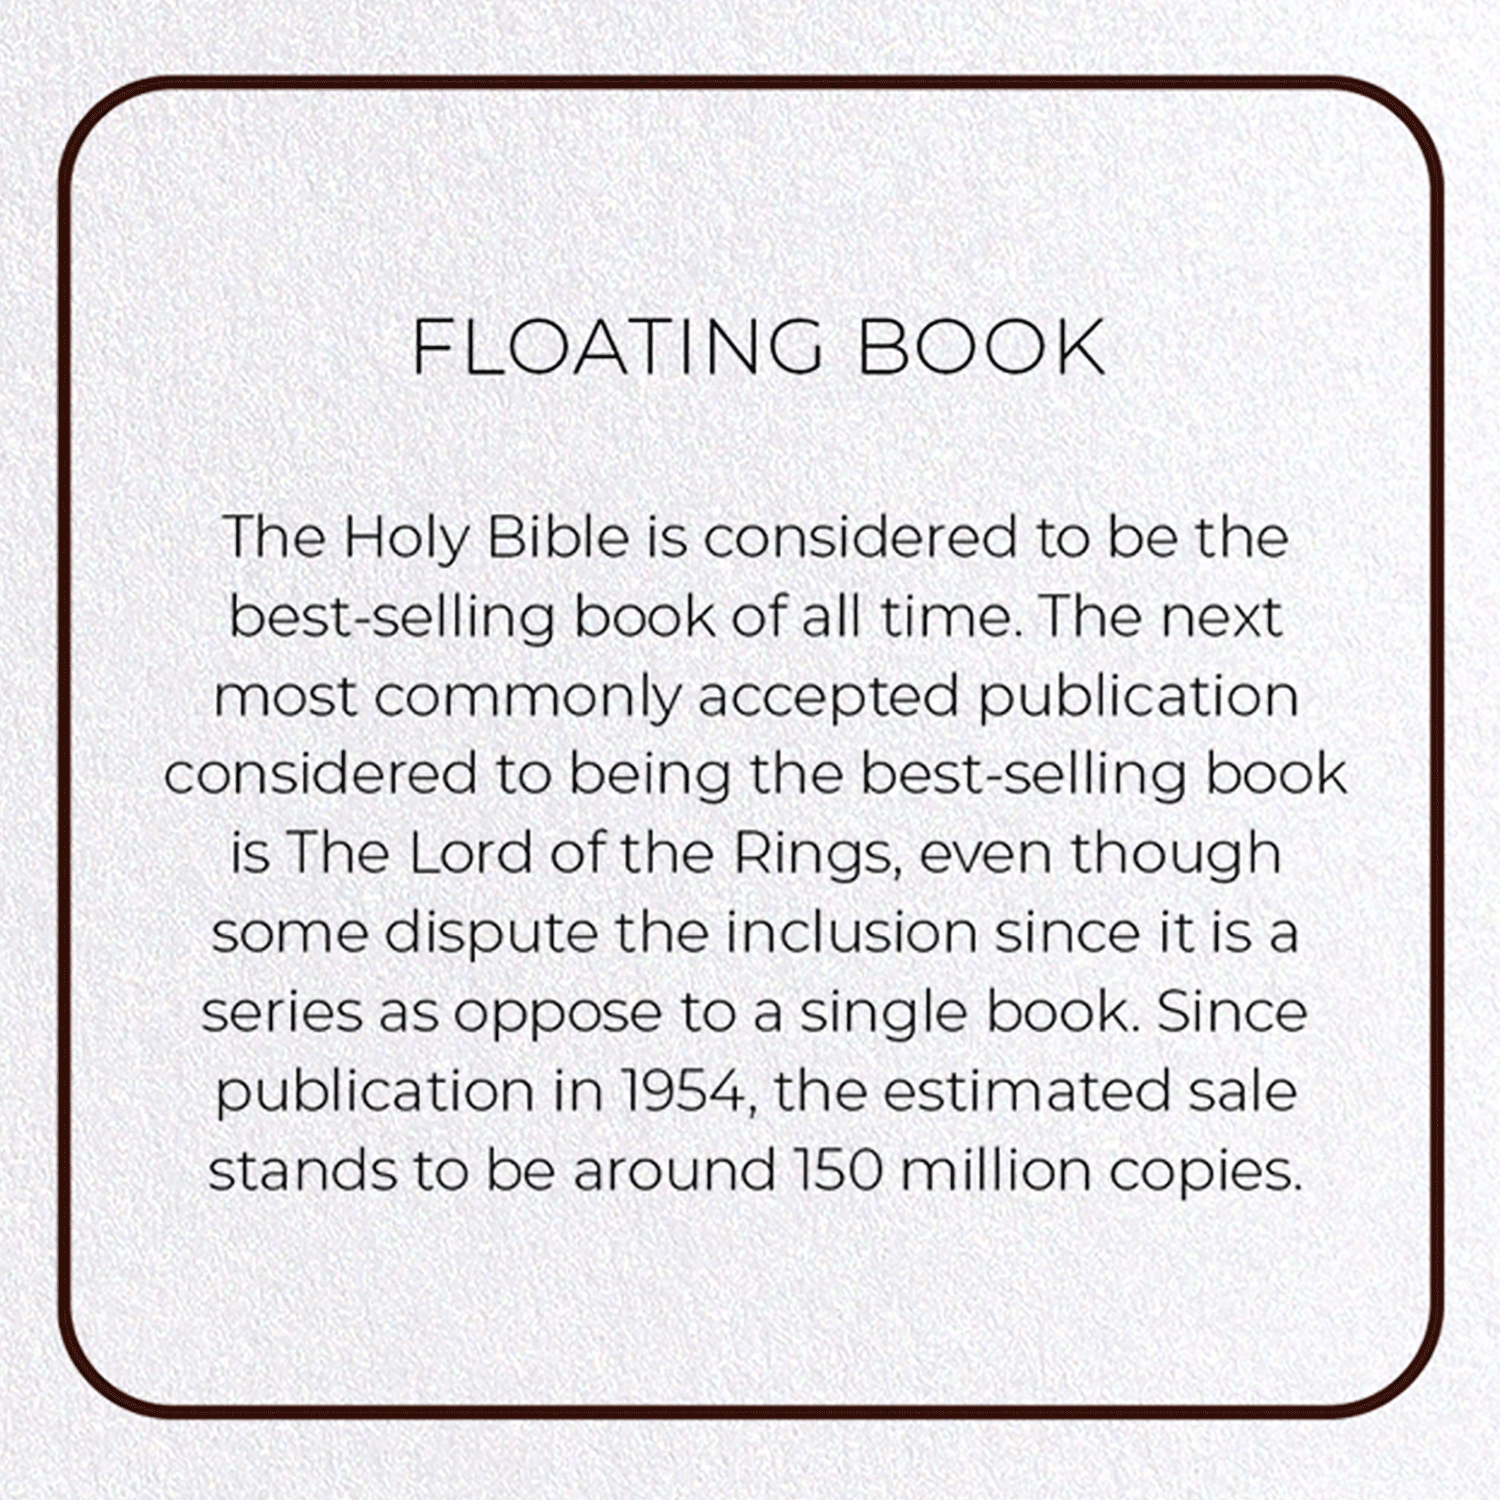 FLOATING BOOK